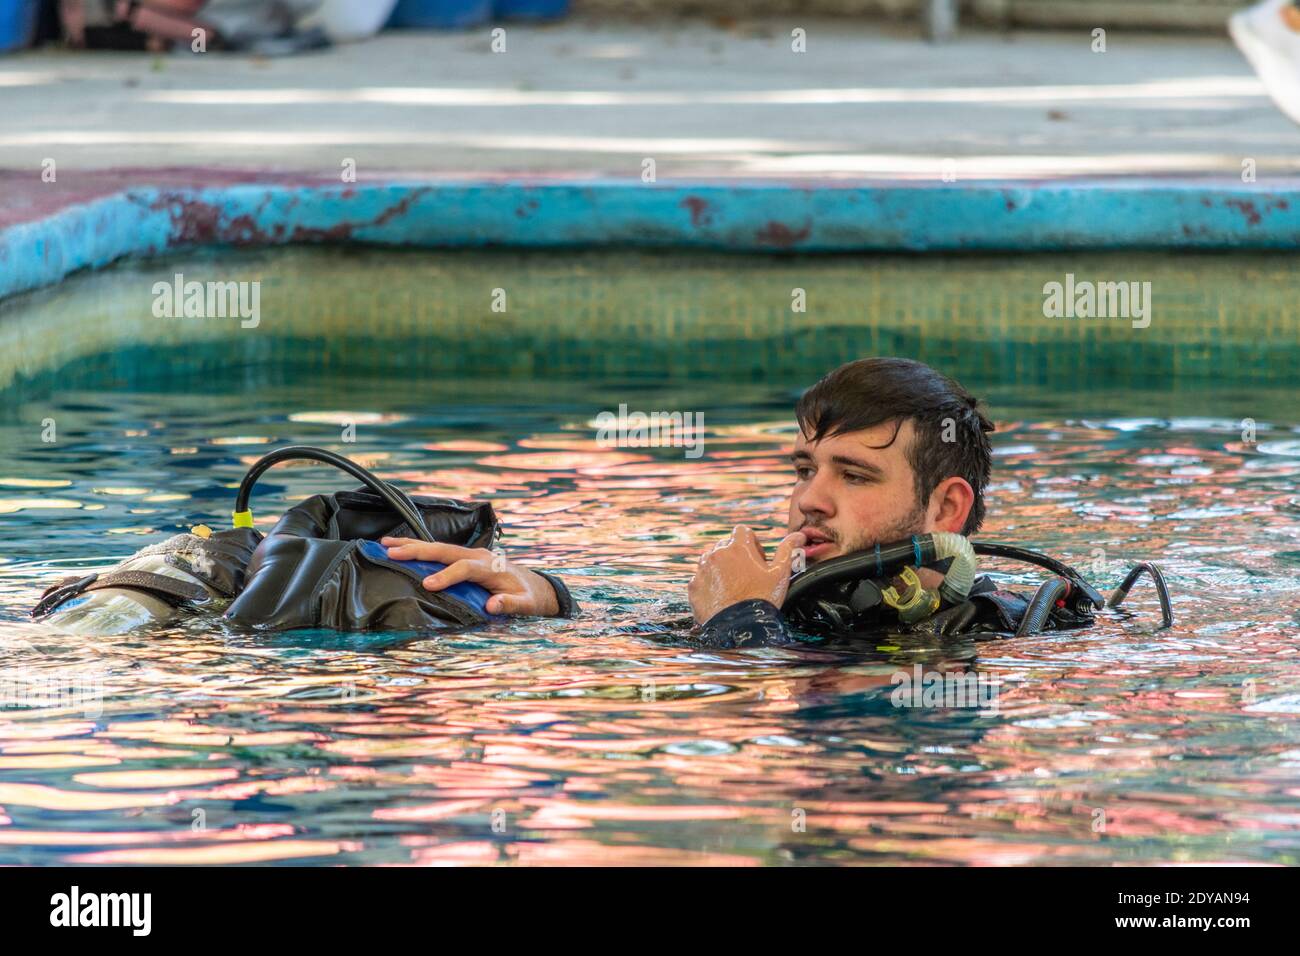 diver without his googles helping another to dive into water Stock Photo